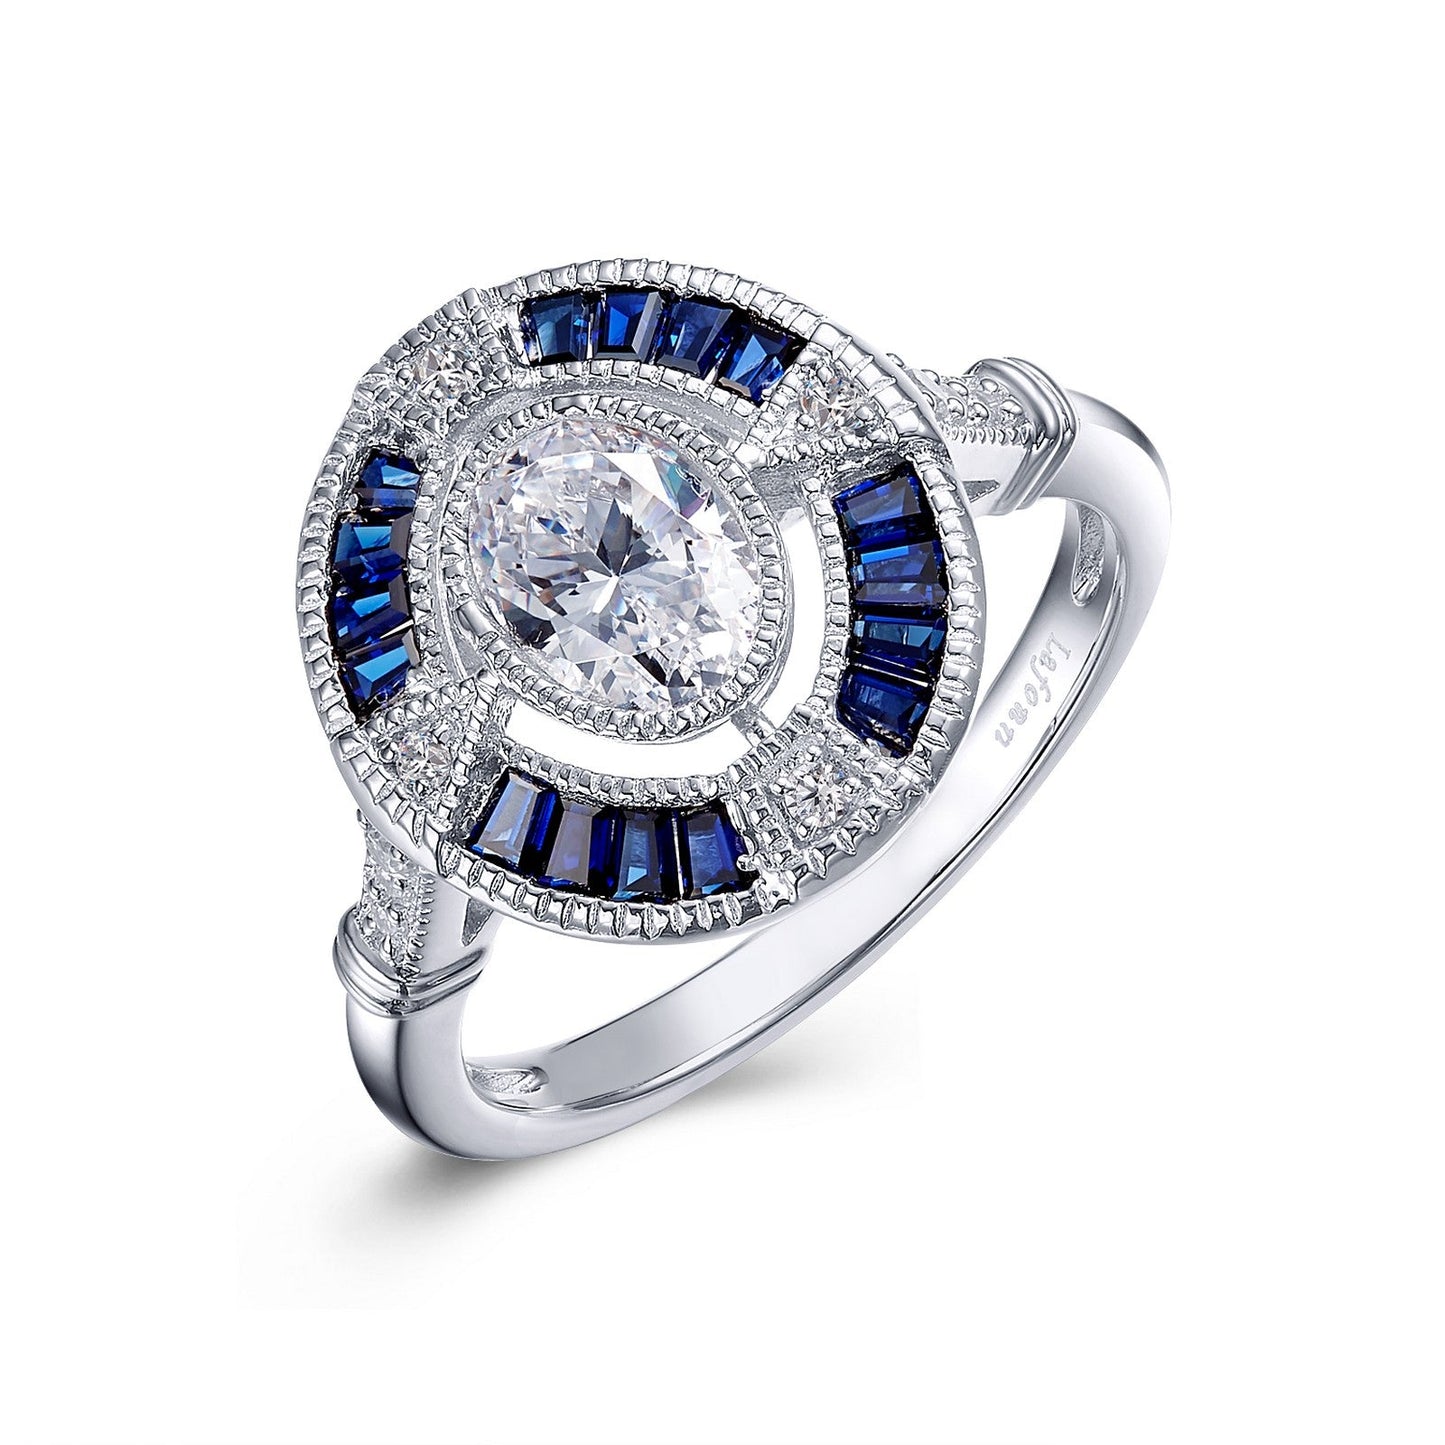 Load image into Gallery viewer, Lafonn Vintage Inspired Engagement Ring 27 Stone Count R0395CSP08
